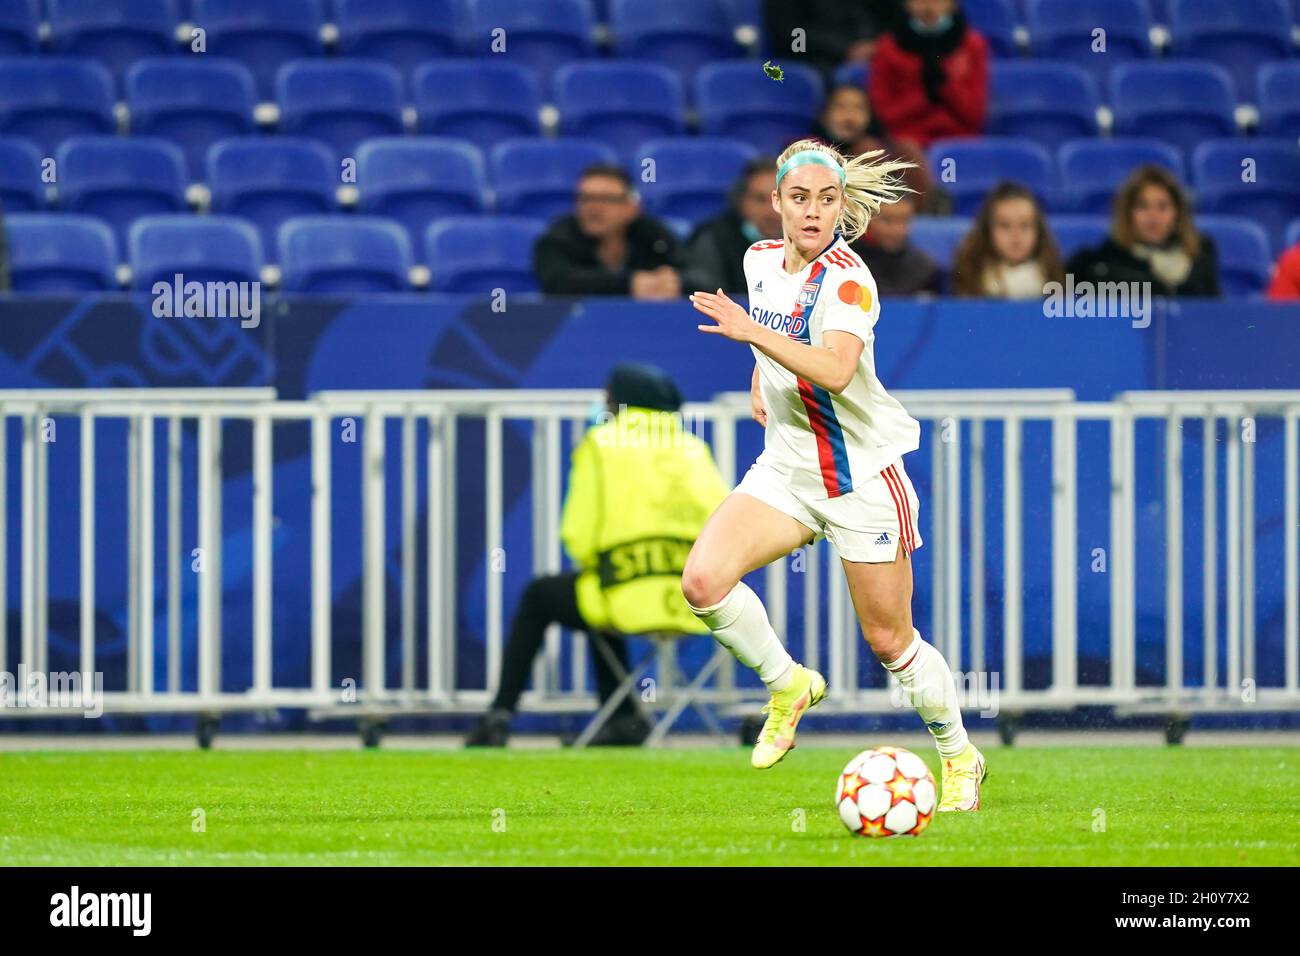 Lyon, France. 14th Oct, 2021. Ellie Carpenter (12 Lyon) controls the ball  (action) during the UEFA Womens Champions League Group stage round 2  football match between Olympique Lyonnais and SL Benfica at